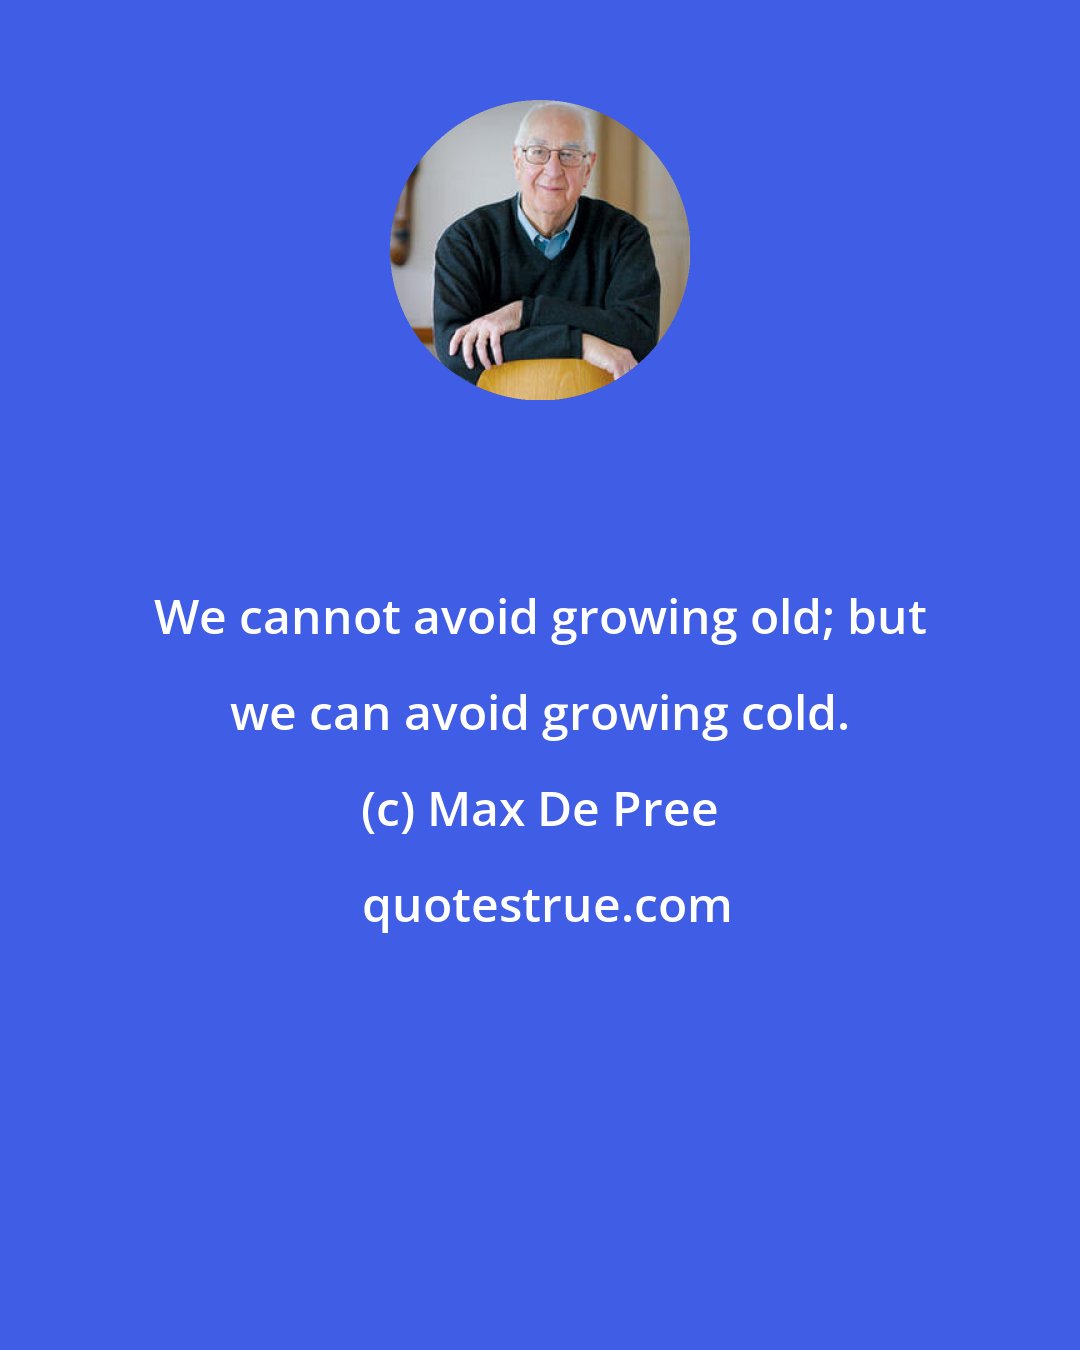 Max De Pree: We cannot avoid growing old; but we can avoid growing cold.